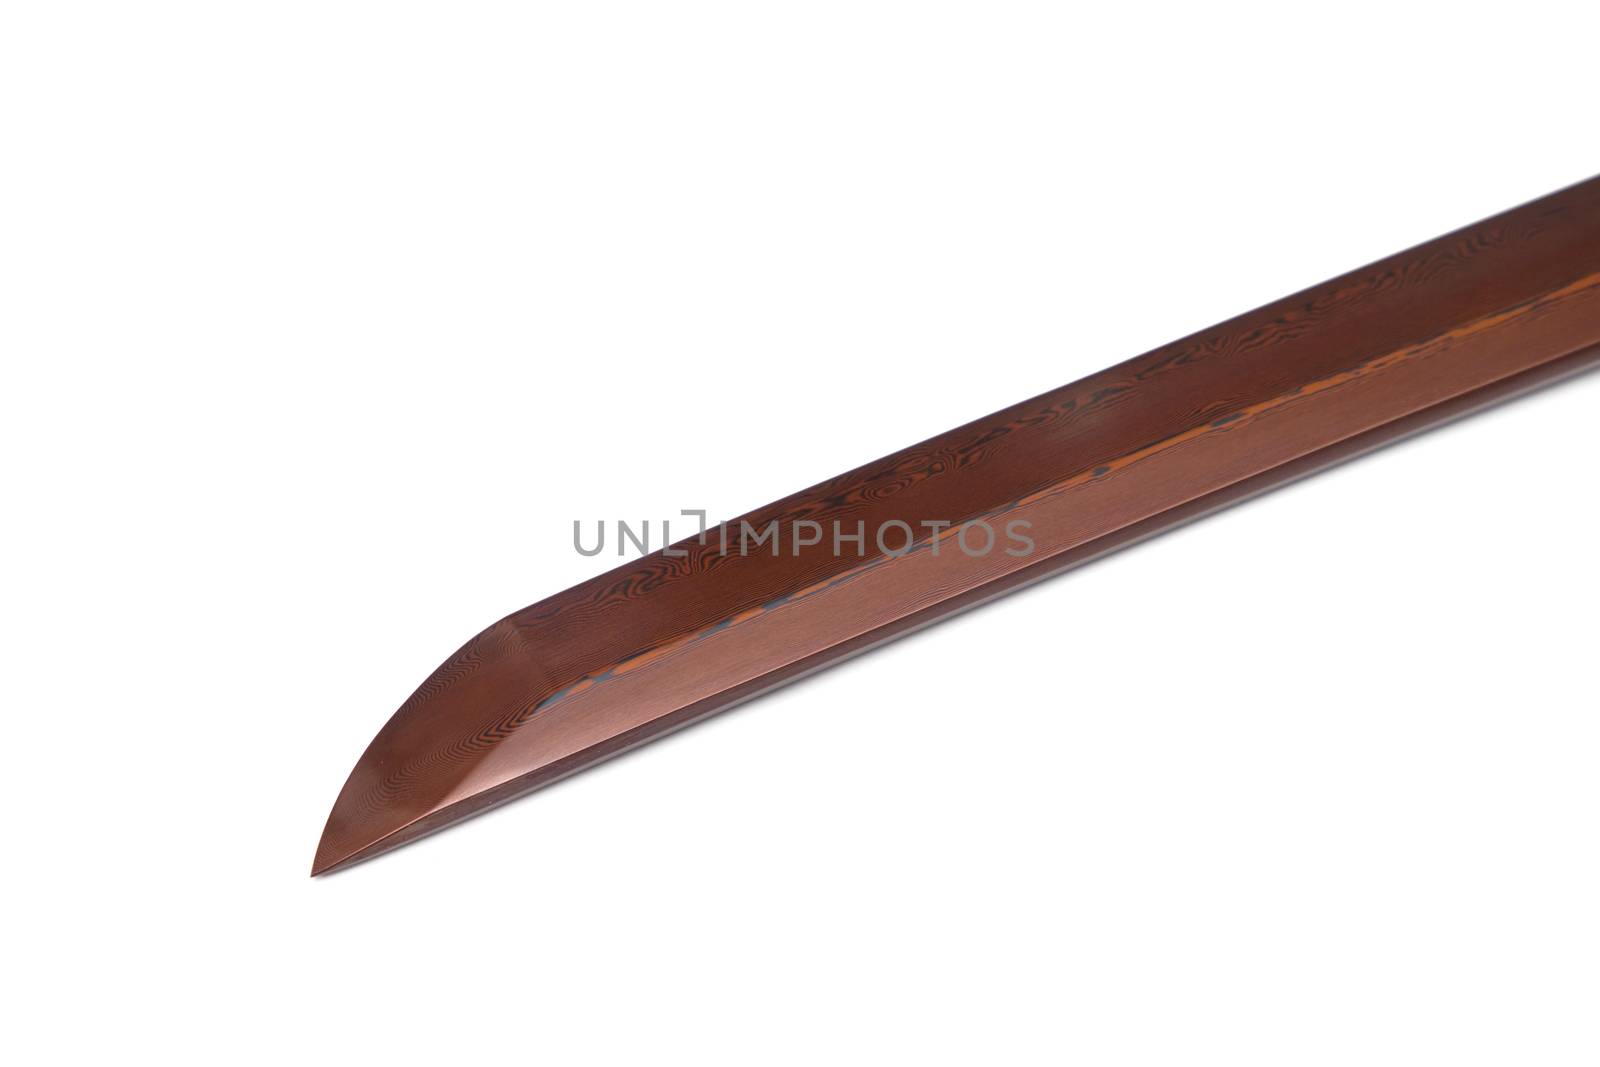 Tip of red folded steel blade of Japanese sword  (Chinese made) isolated in white background. by joker3753